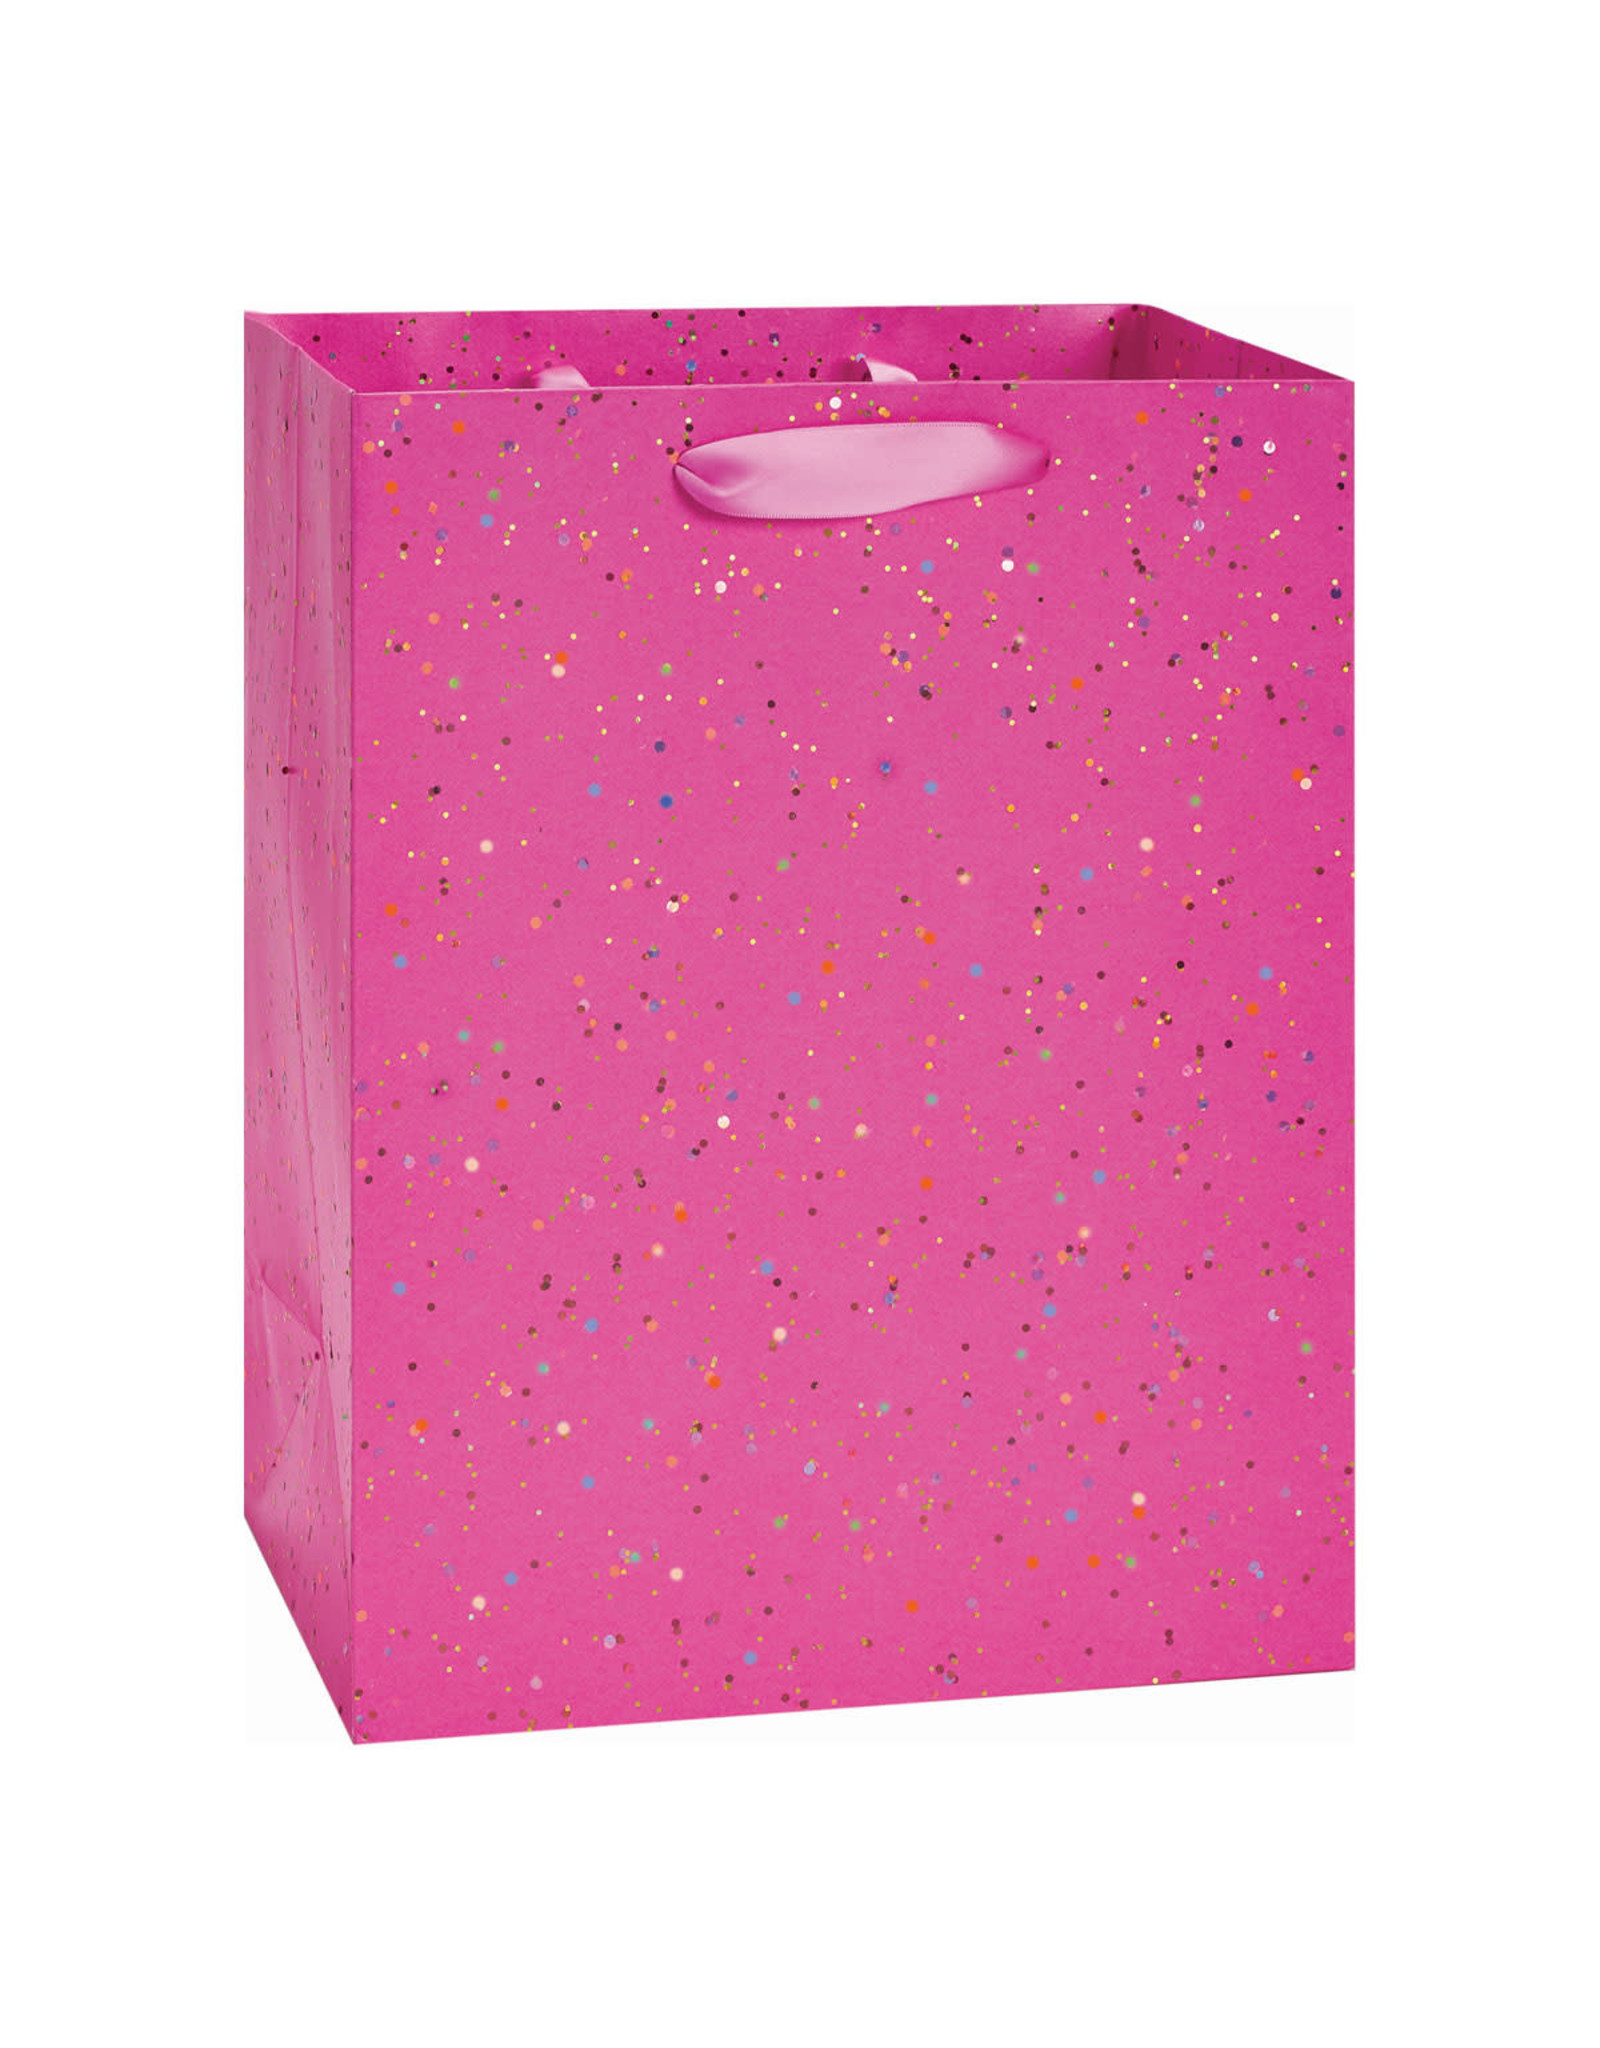 PAPYRUS® Gift Bag Large 10x13x6 for Glitter On Pink